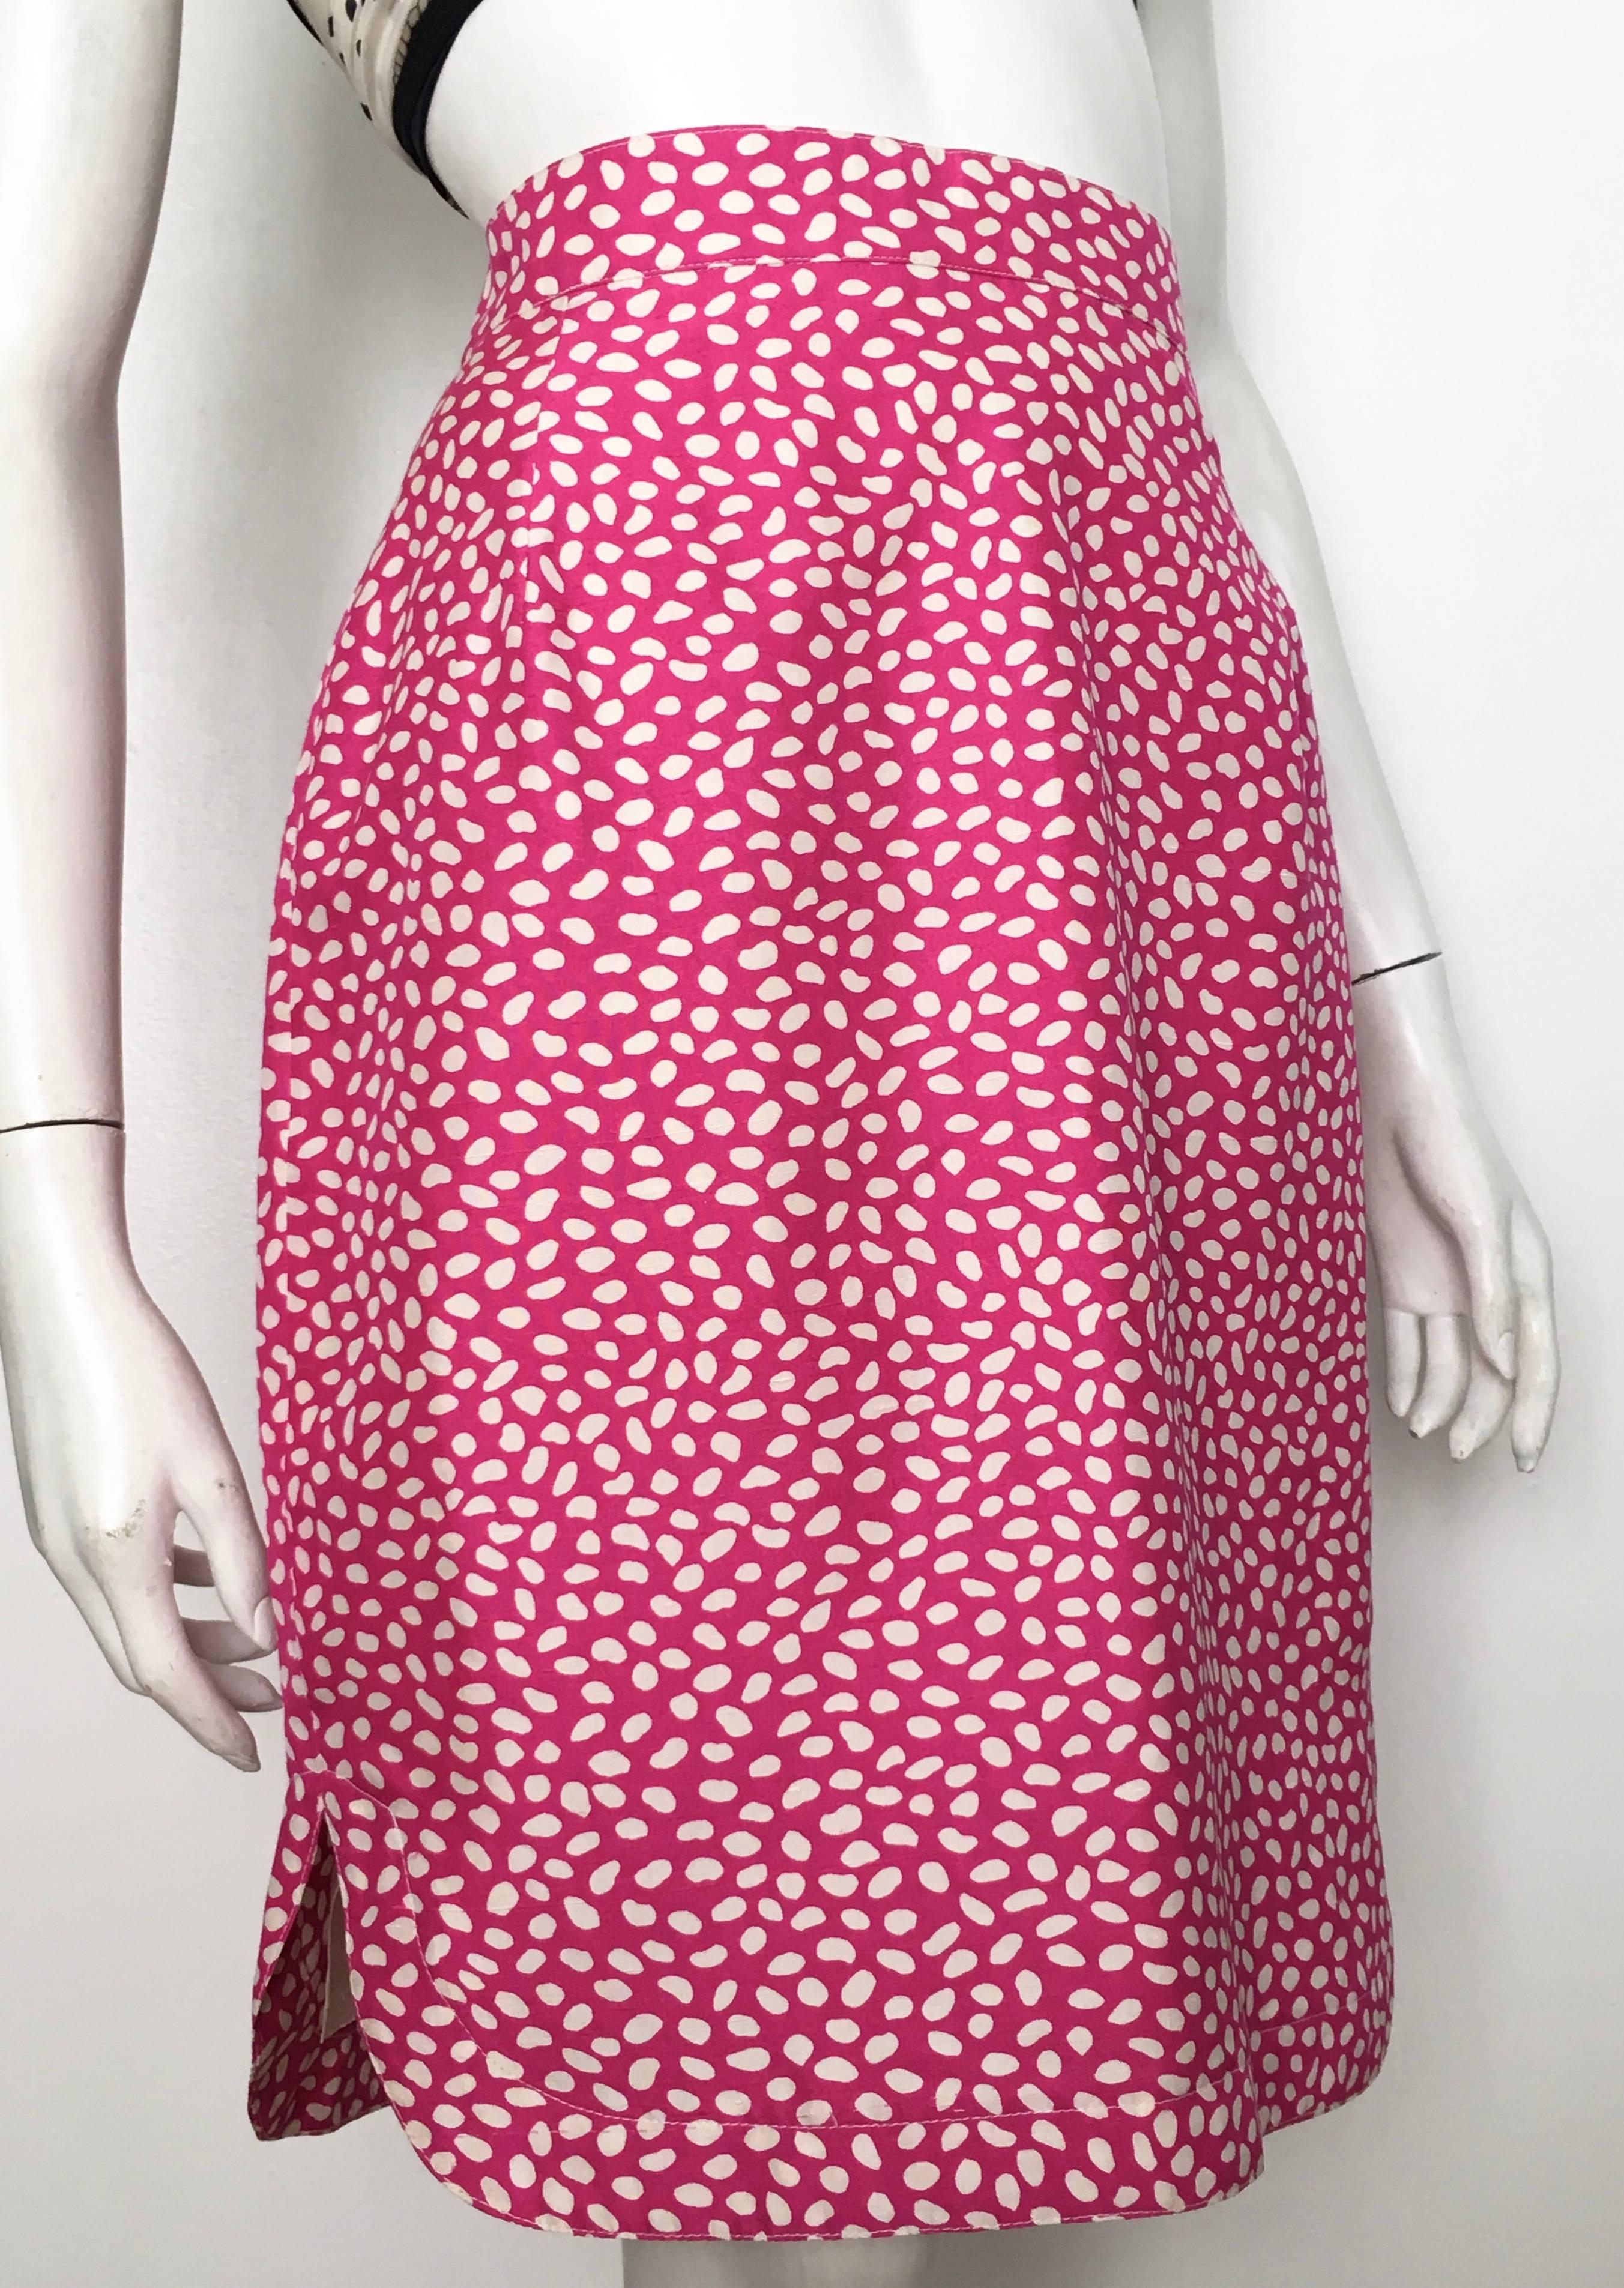 Louis Feraud 1980s pink cotton with abstract design straight skirt is marked a size 8 but fits more like a size 6.  The waist on this skirt is 29. 1/2